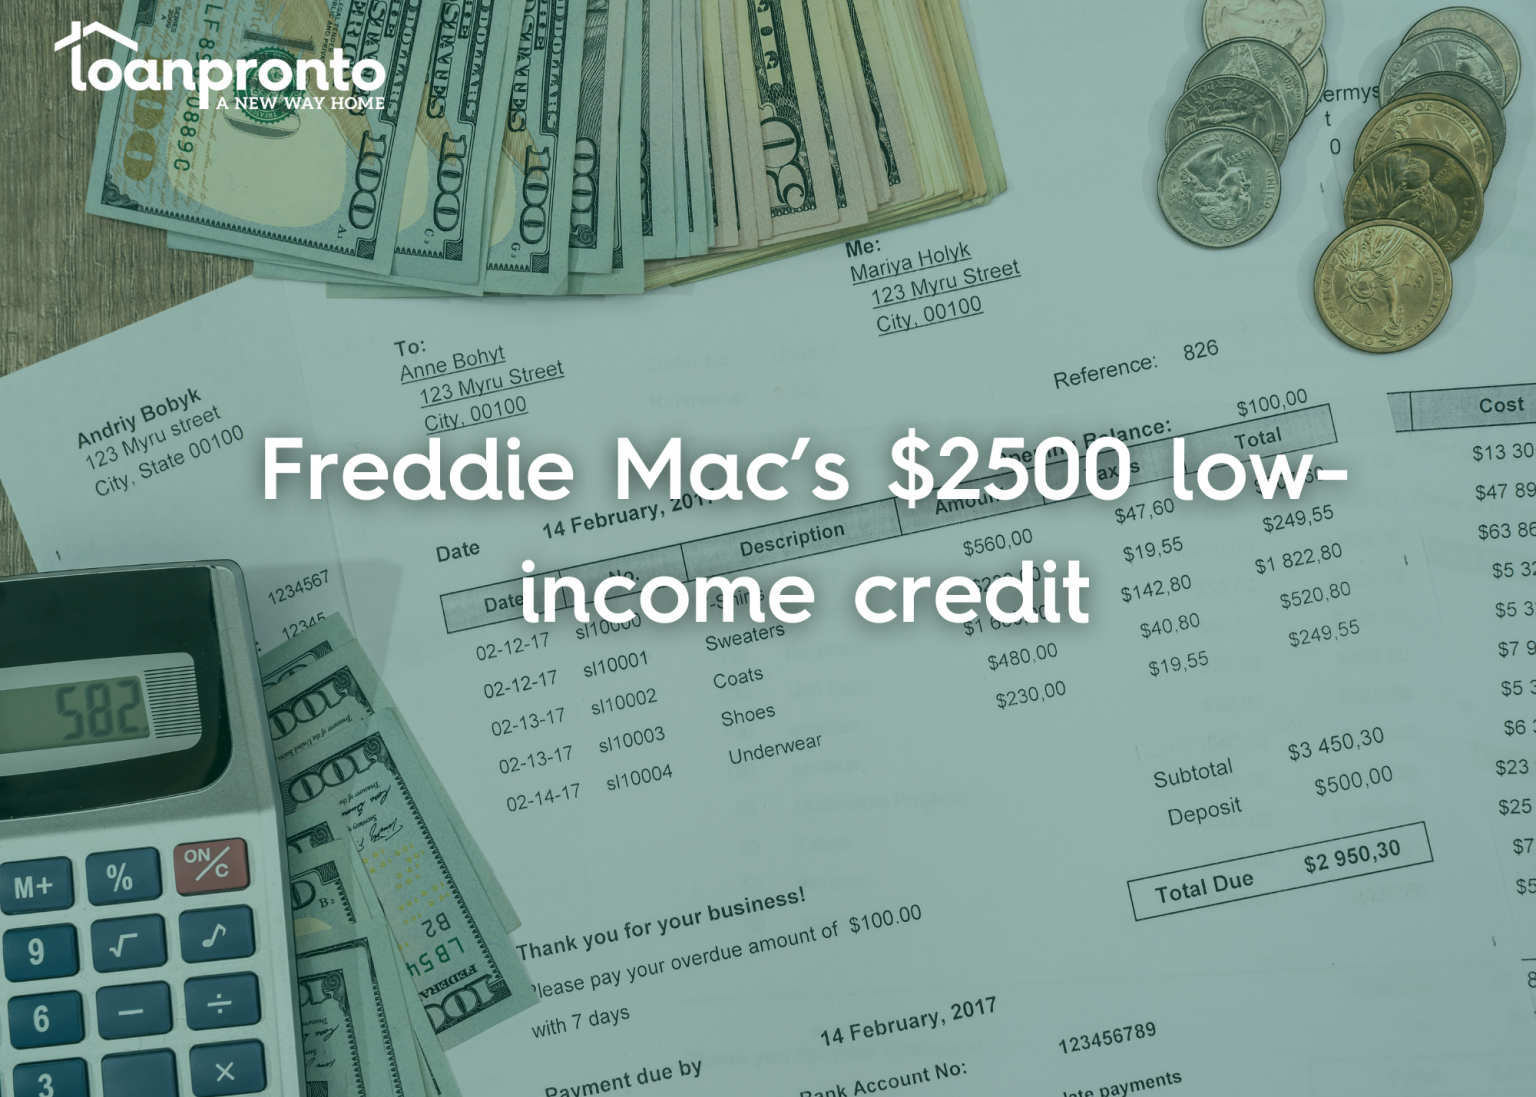 Freddie Mac's low-income credit and Home Possible Program